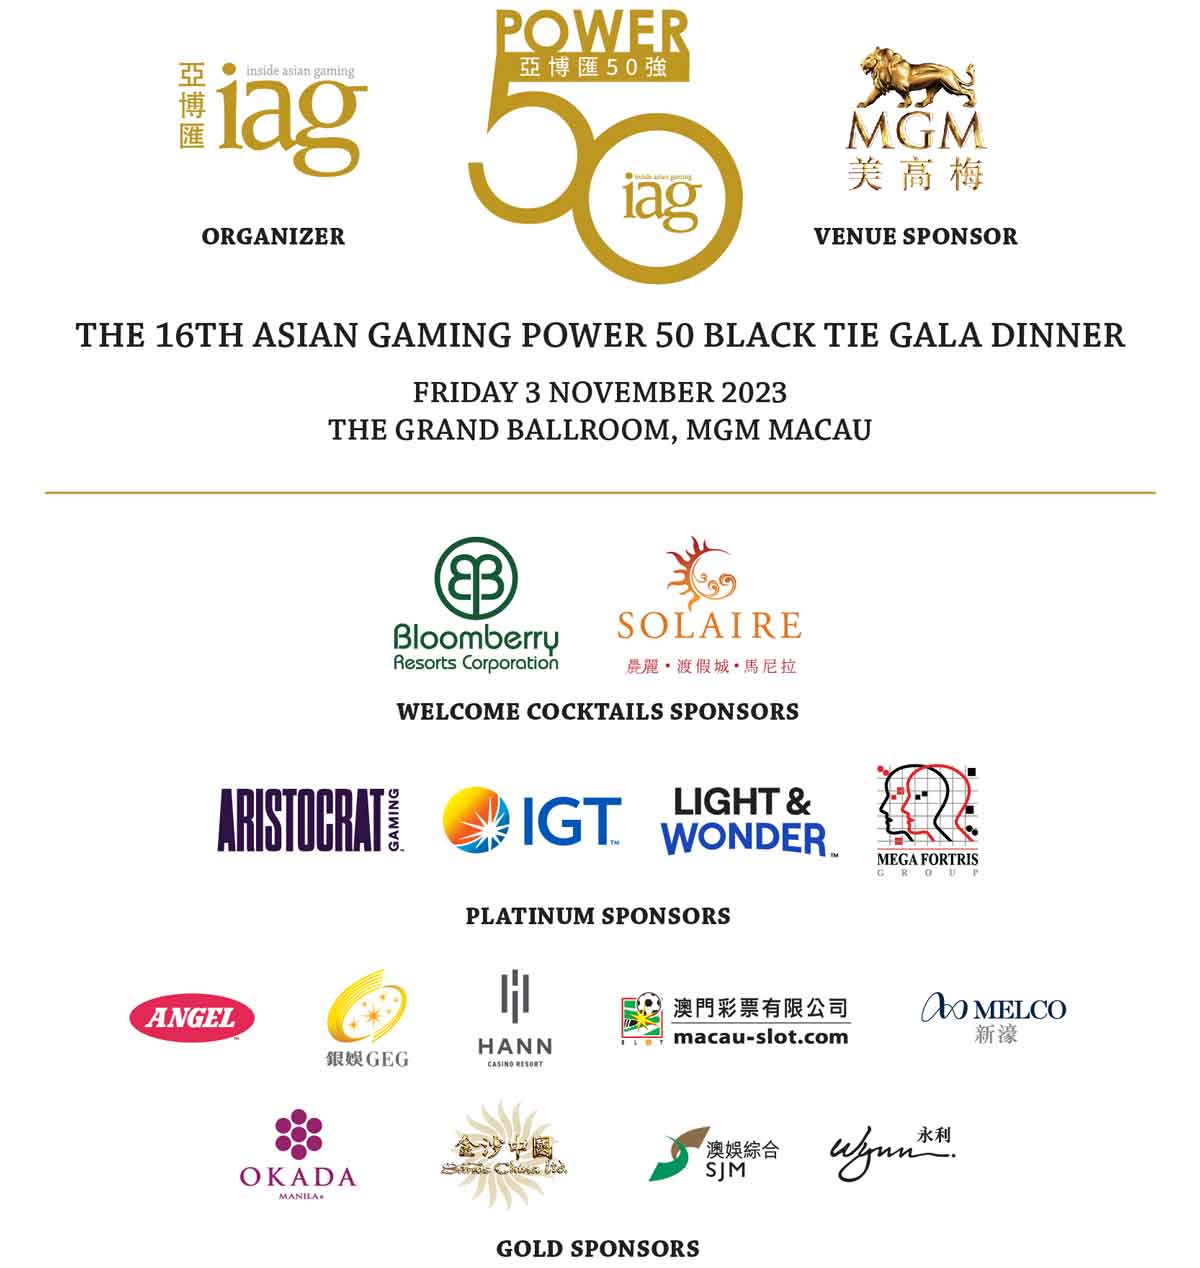 Bloomberry won three major awards from Global Gaming Awards Asia